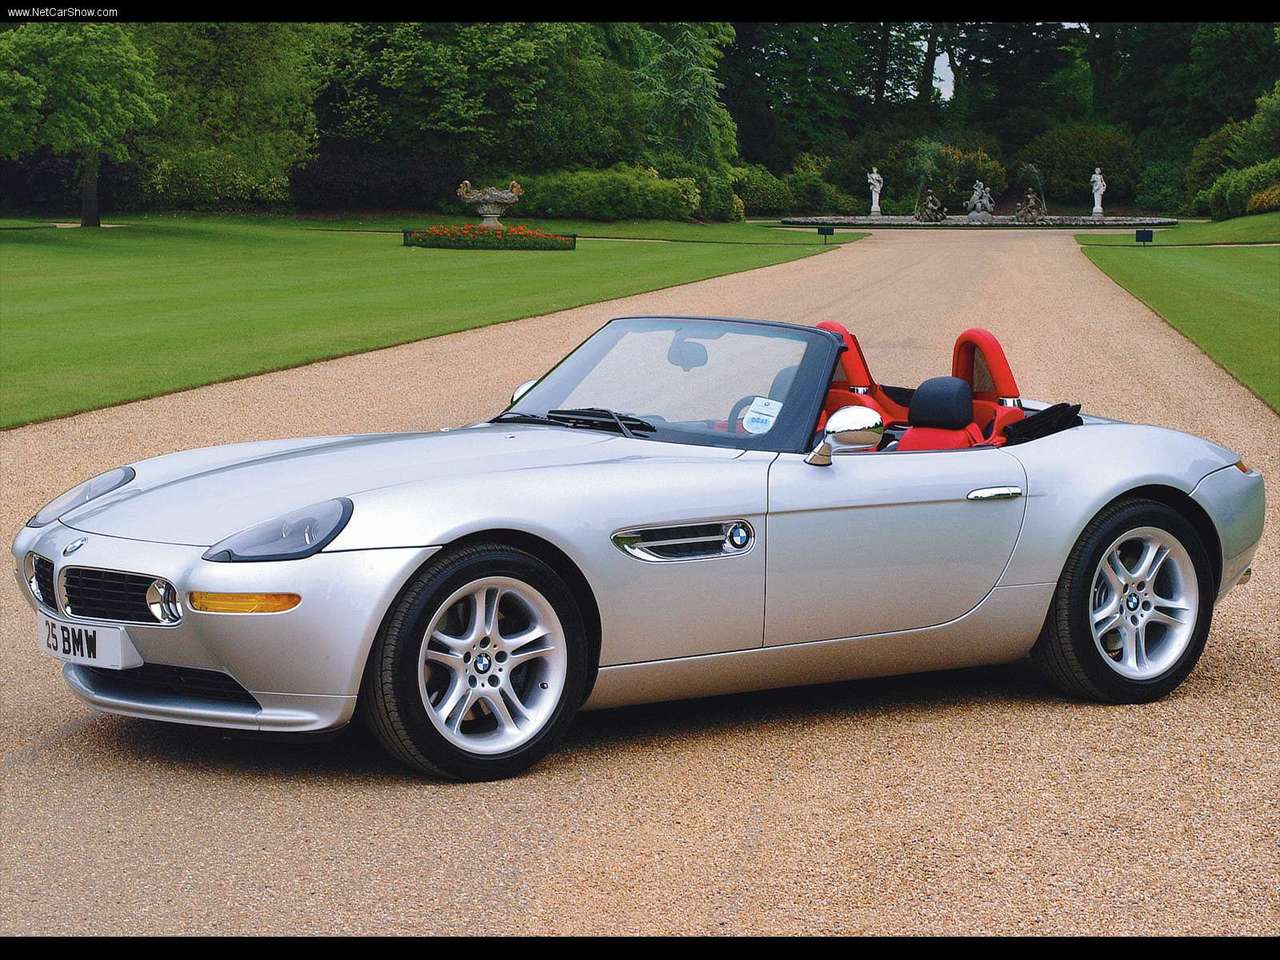 BMW Z8 prices have skyrocketed